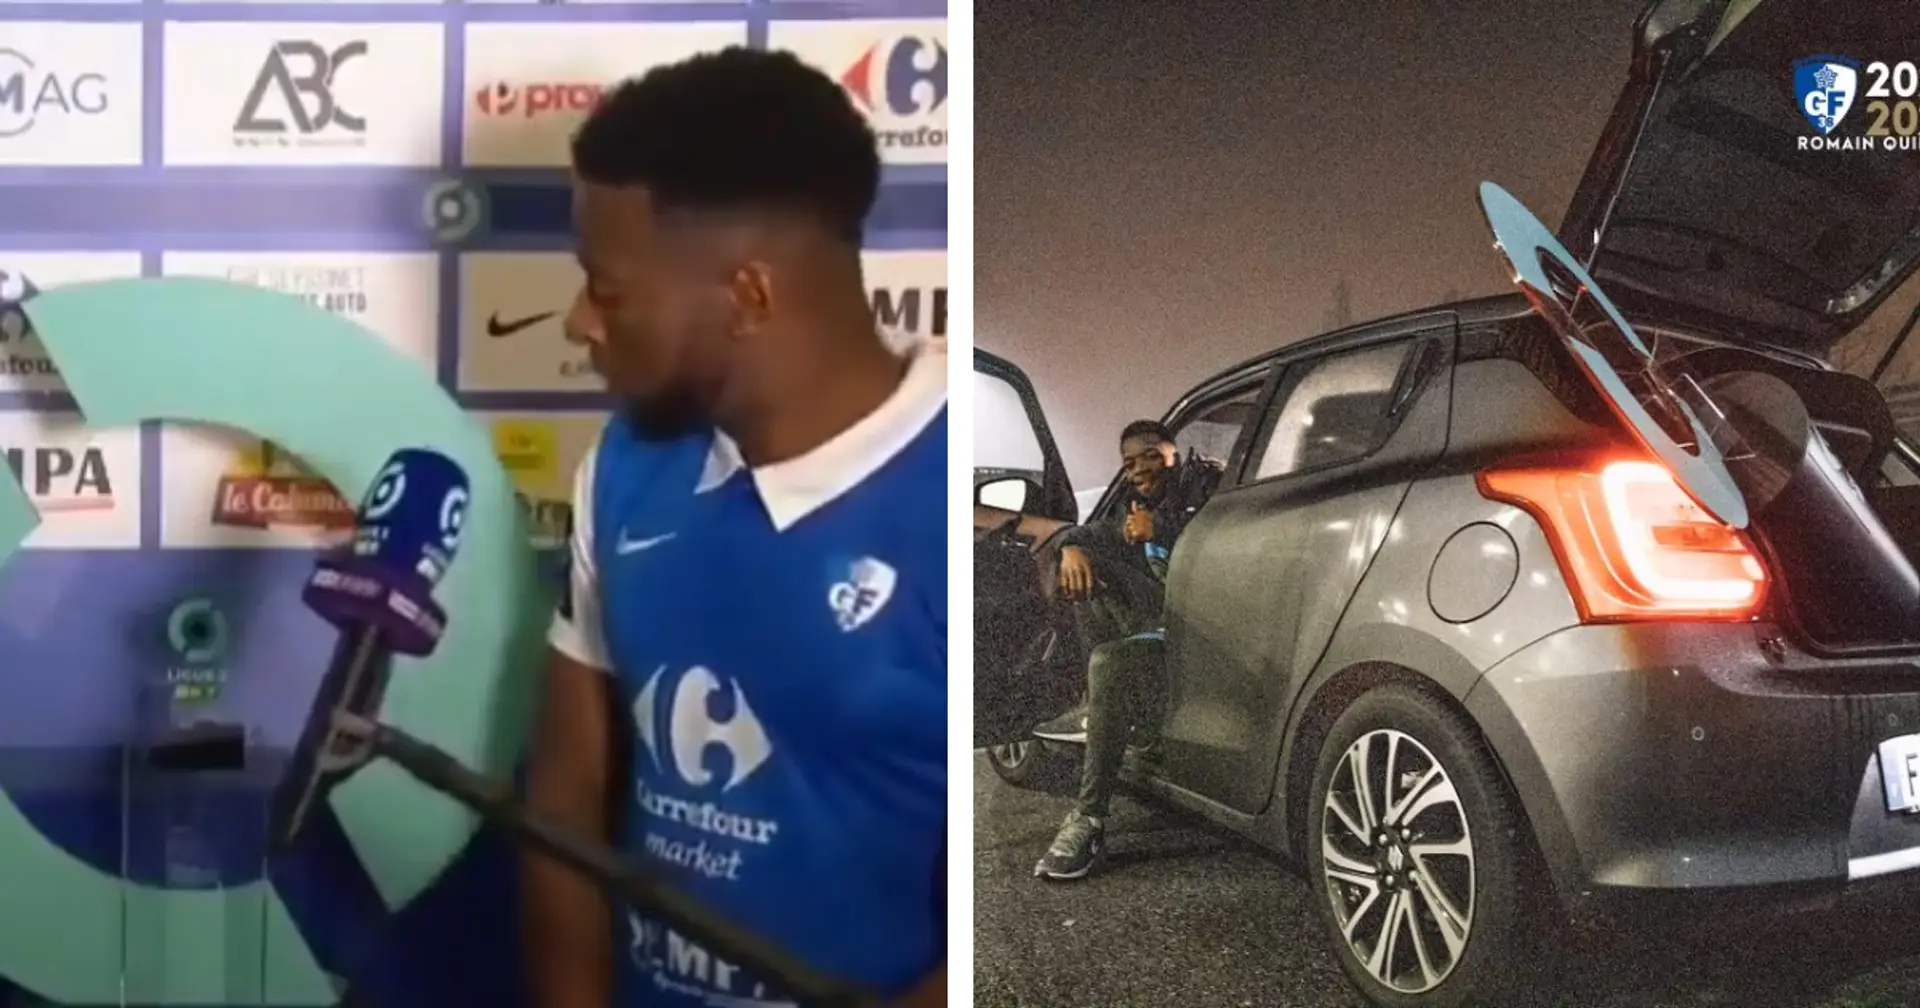 Ligue 2 player thinks MotM award is a big stand, actually puts it into trunk of his car